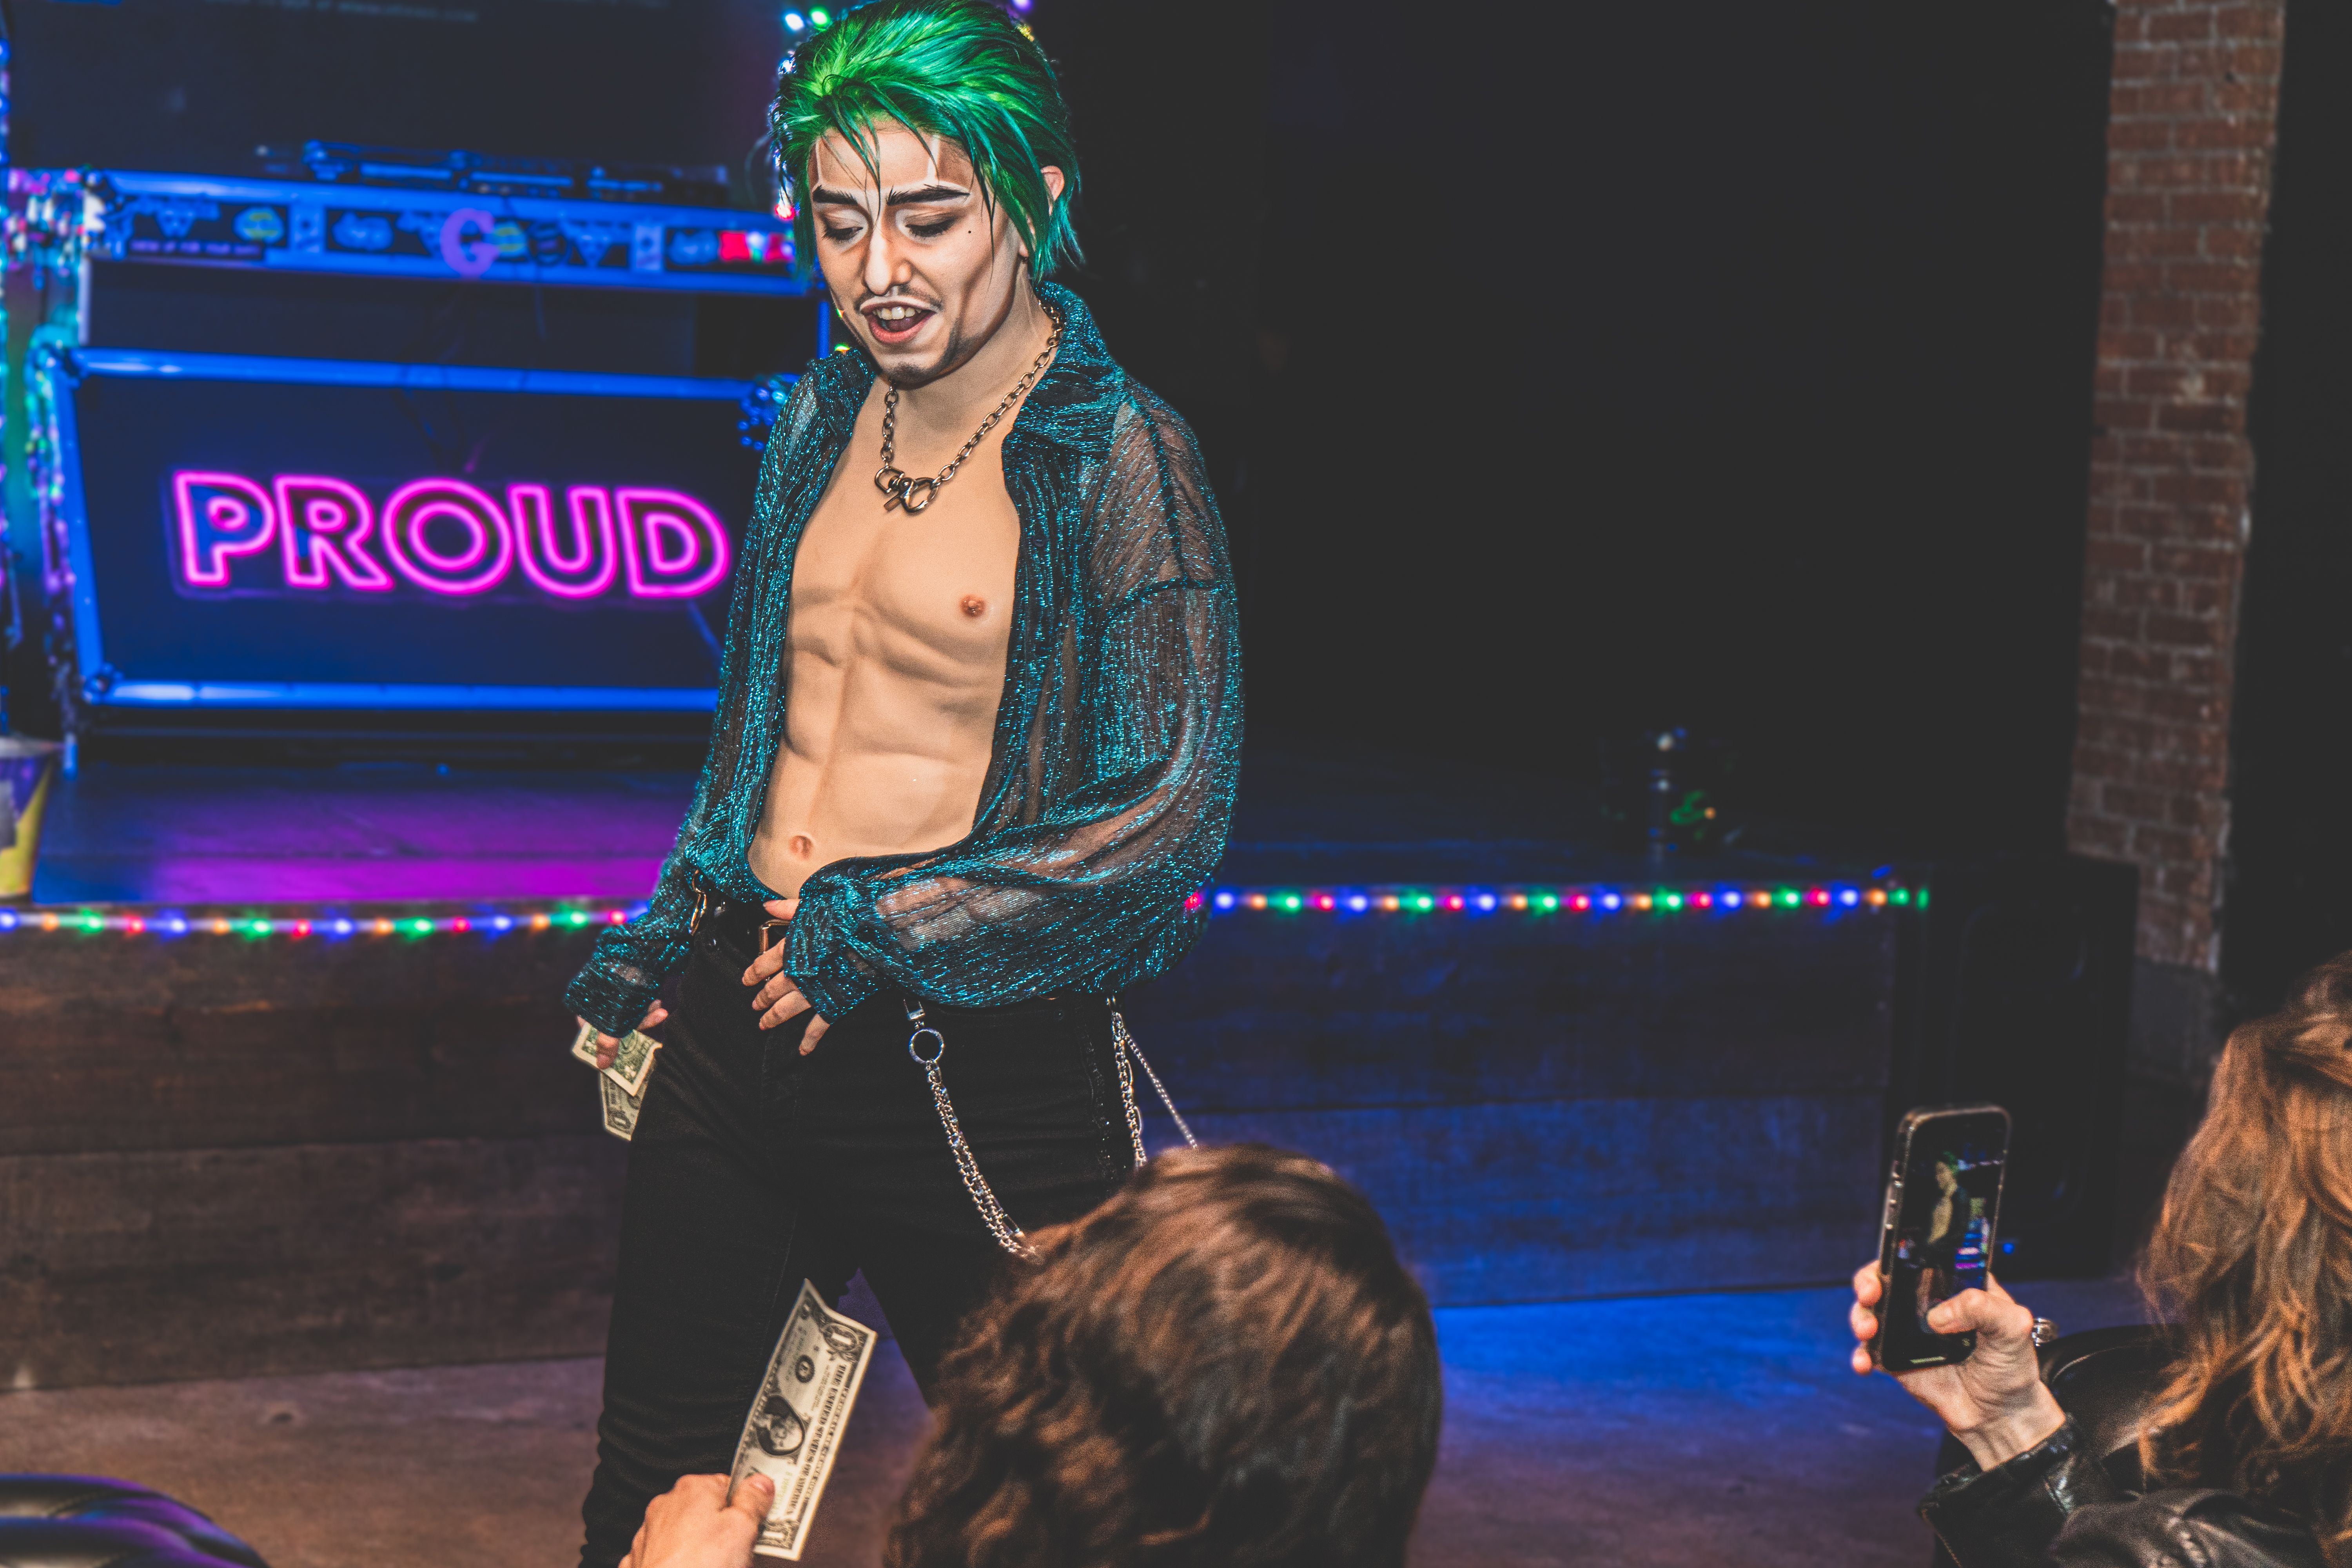 Photo of a drag king wearing a green wig and a blue button-up shirt open